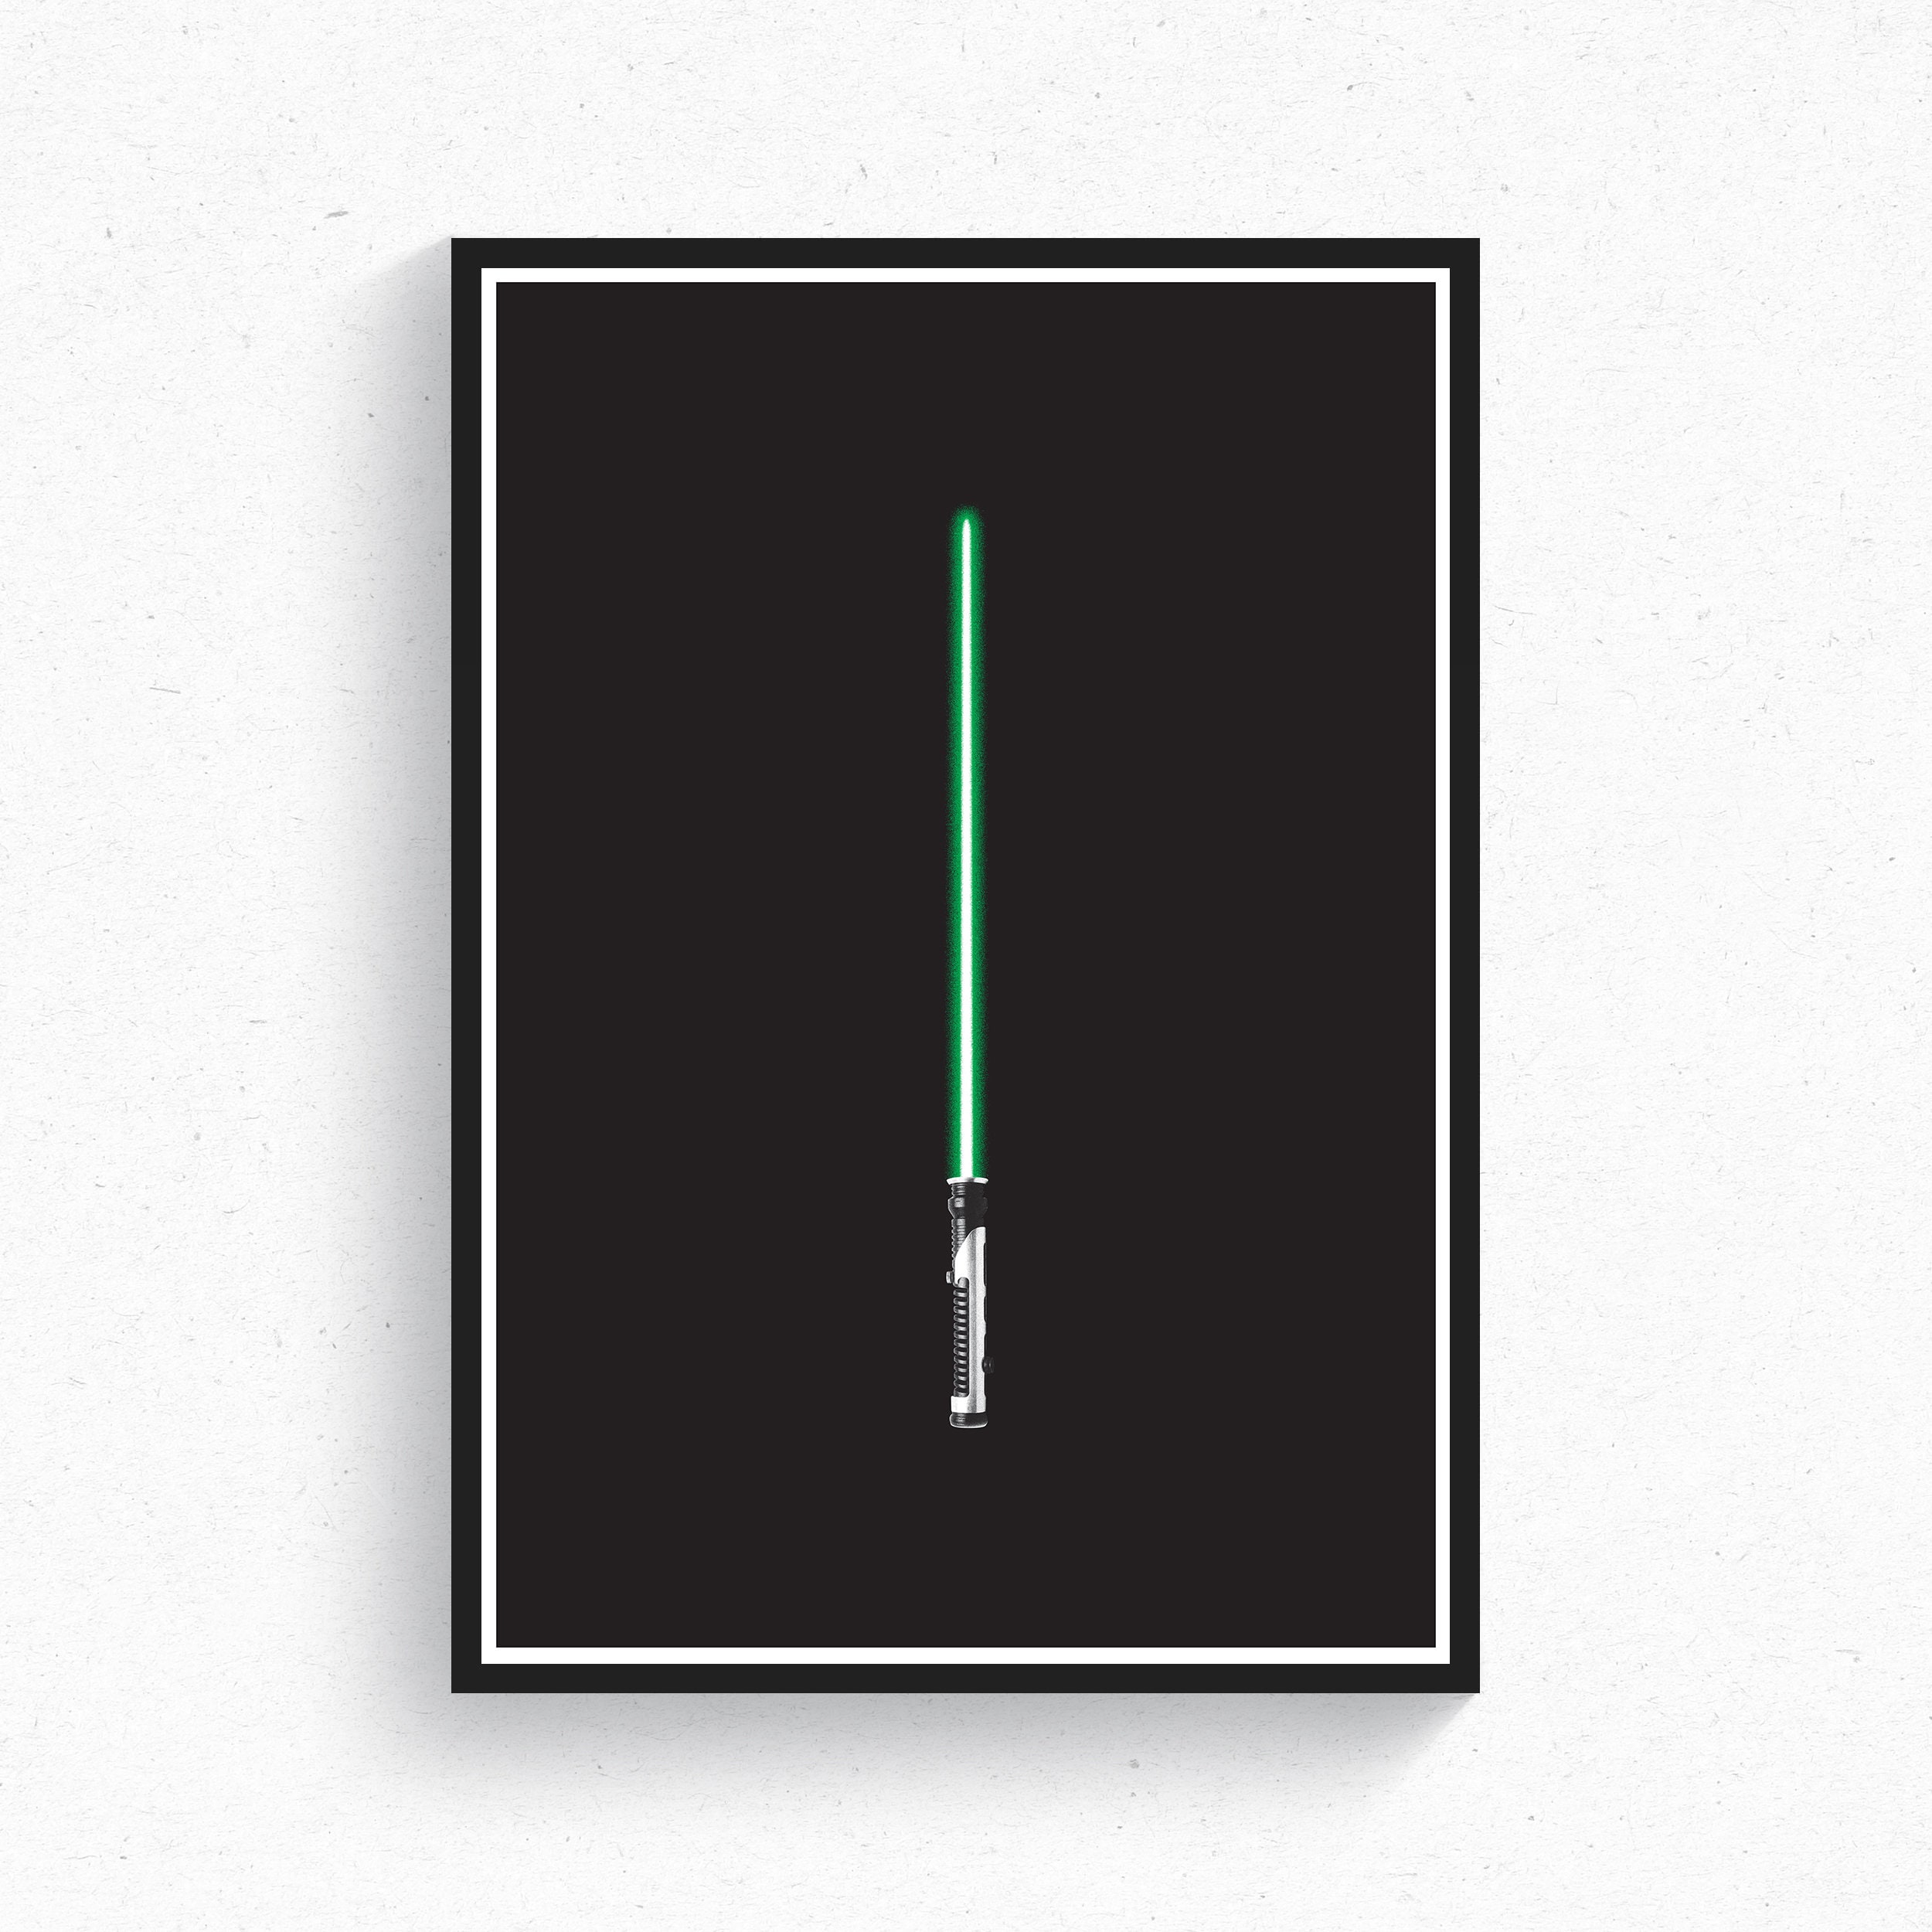 Qui-Gon Jinn Poster for Sale by mgraumlich